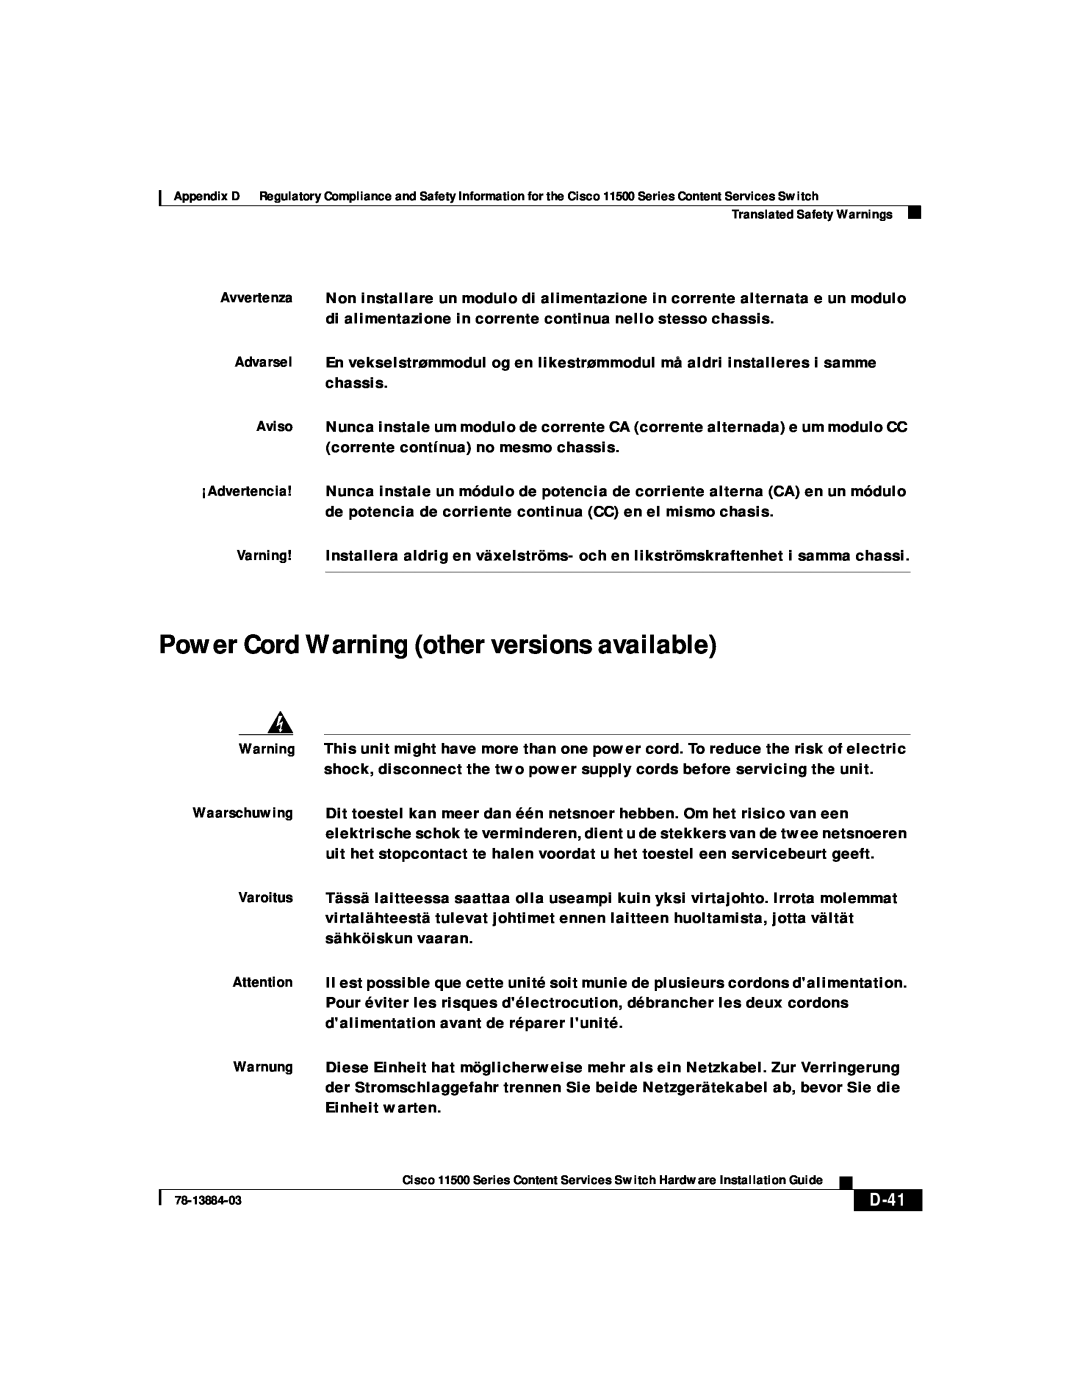 Cisco Systems 11500 Series manual Power Cord Warning other versions available, D-41 